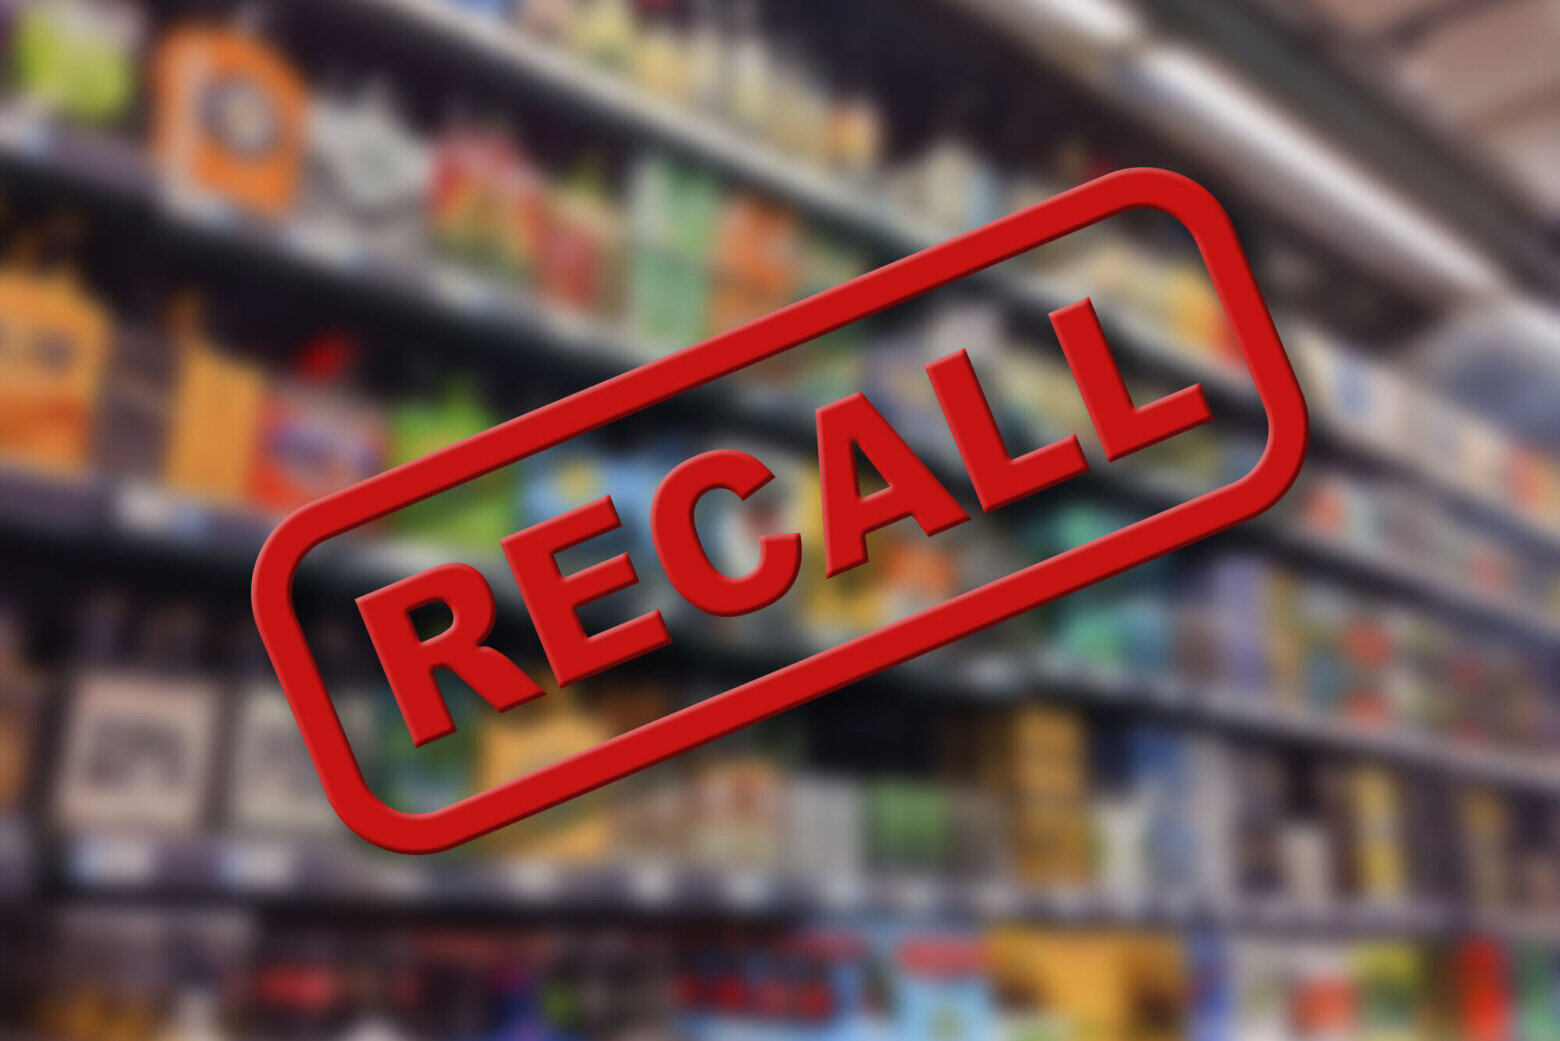 Nearly 5 Million Blenders Recalled Due To Fire And Laceration Hazards